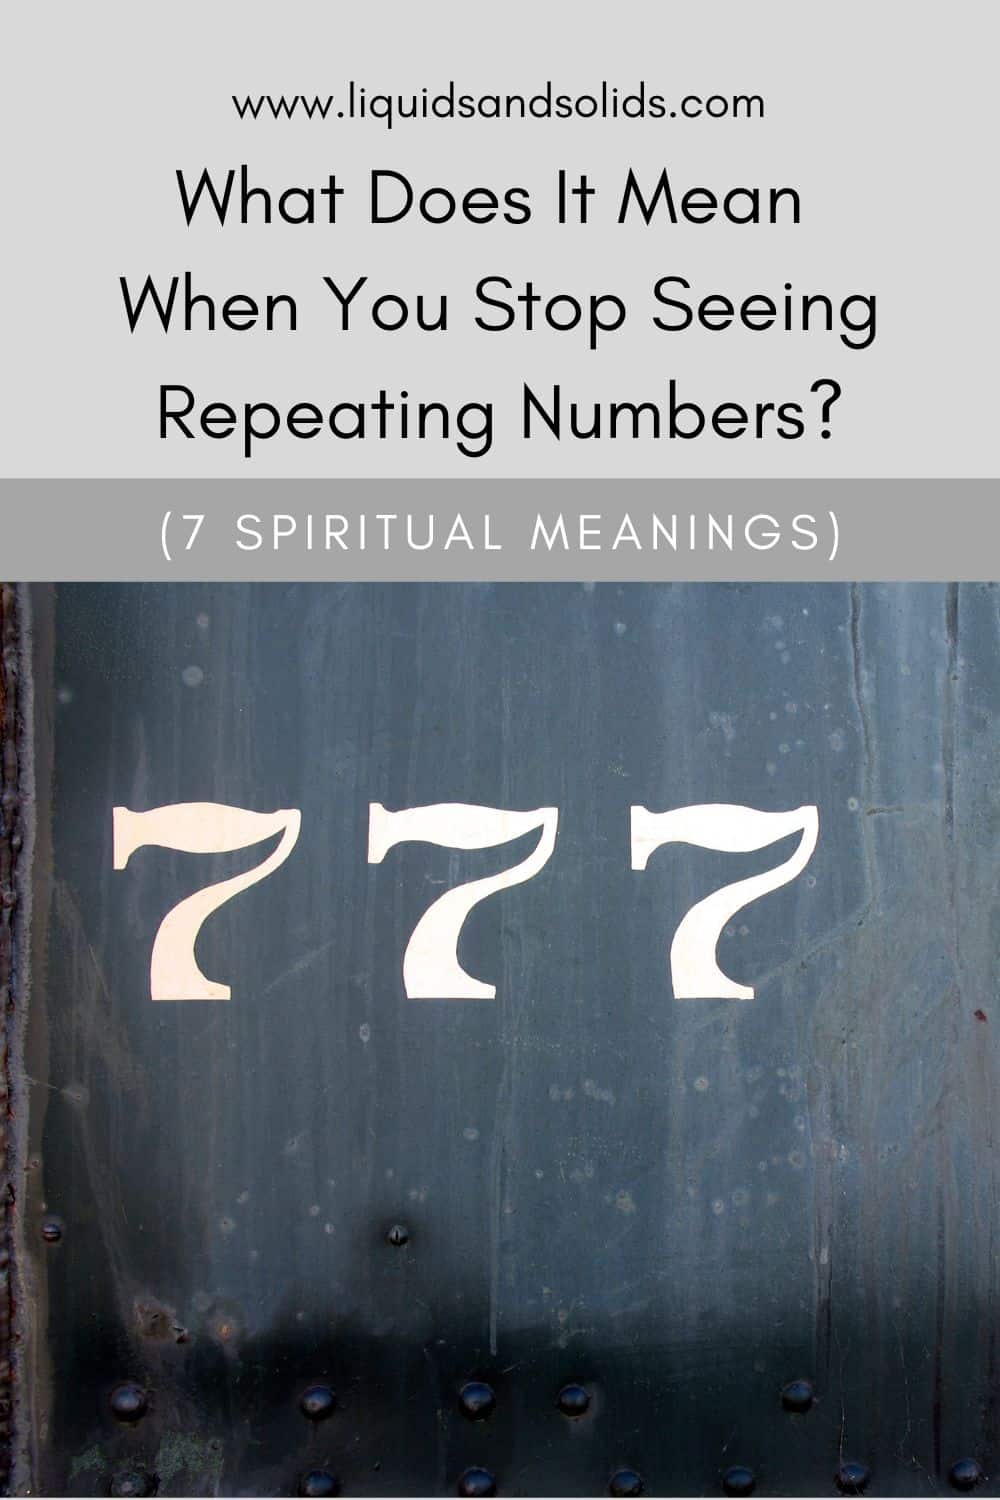 What Does It Mean When You Stop Seeing Repeating Numbers? (7 Spiritual Meanings)